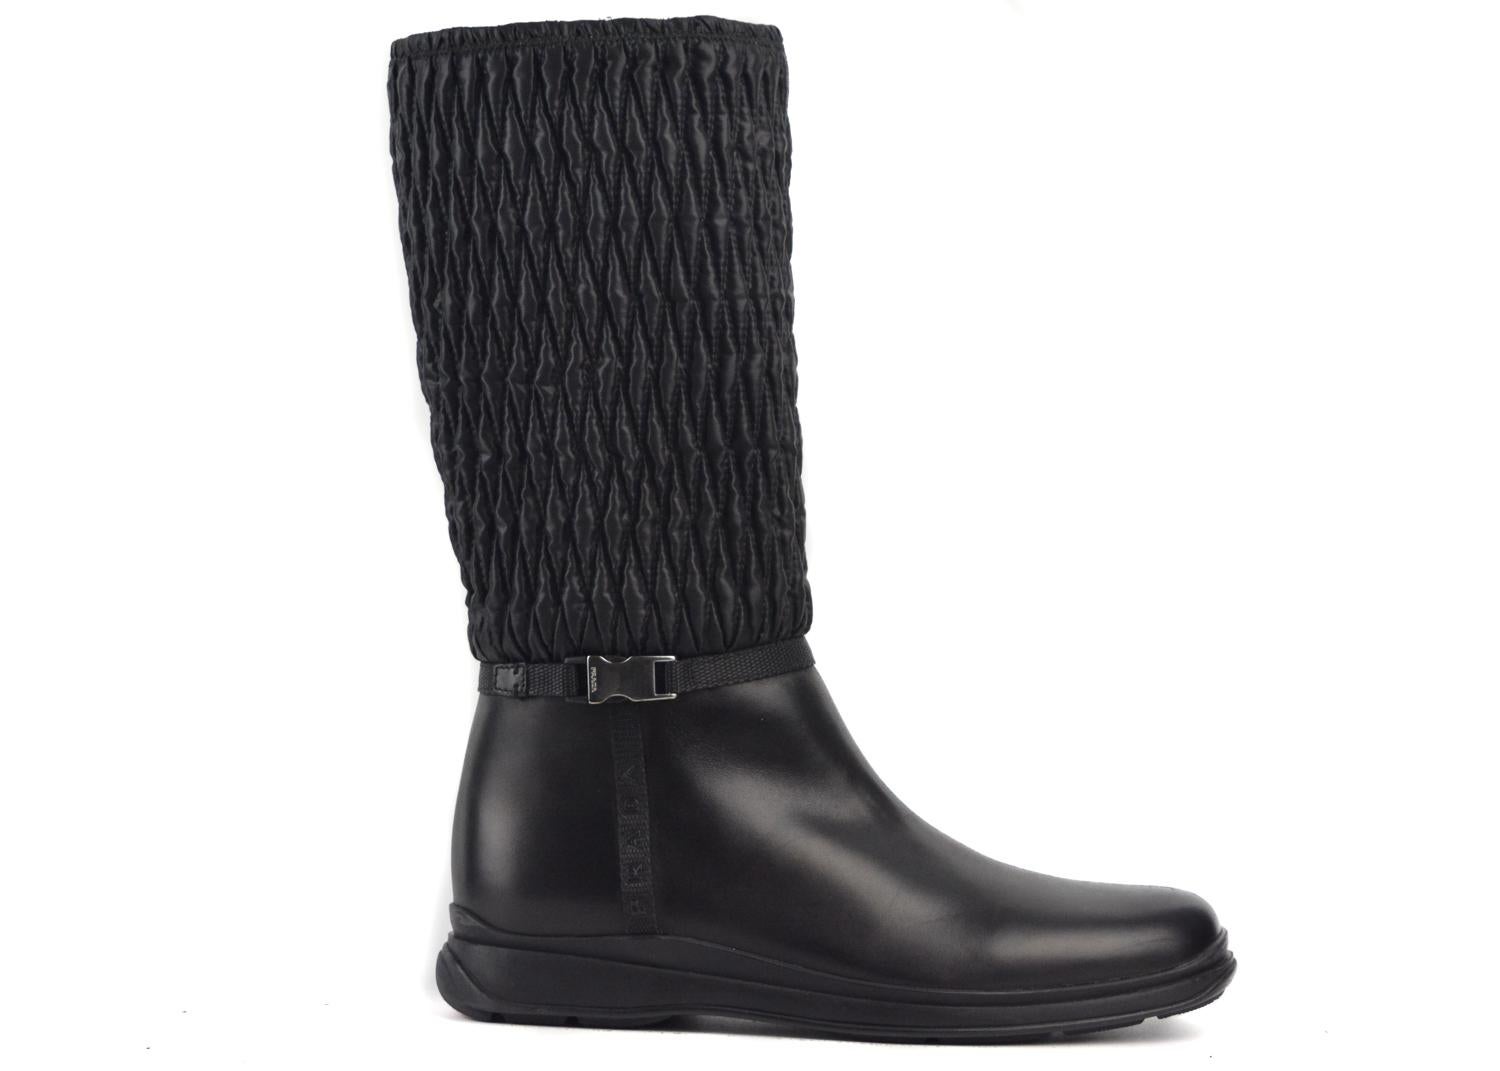 Prada Women's Black Leather Pull On Winter Sport Boots In New Condition For Sale In Brooklyn, NY